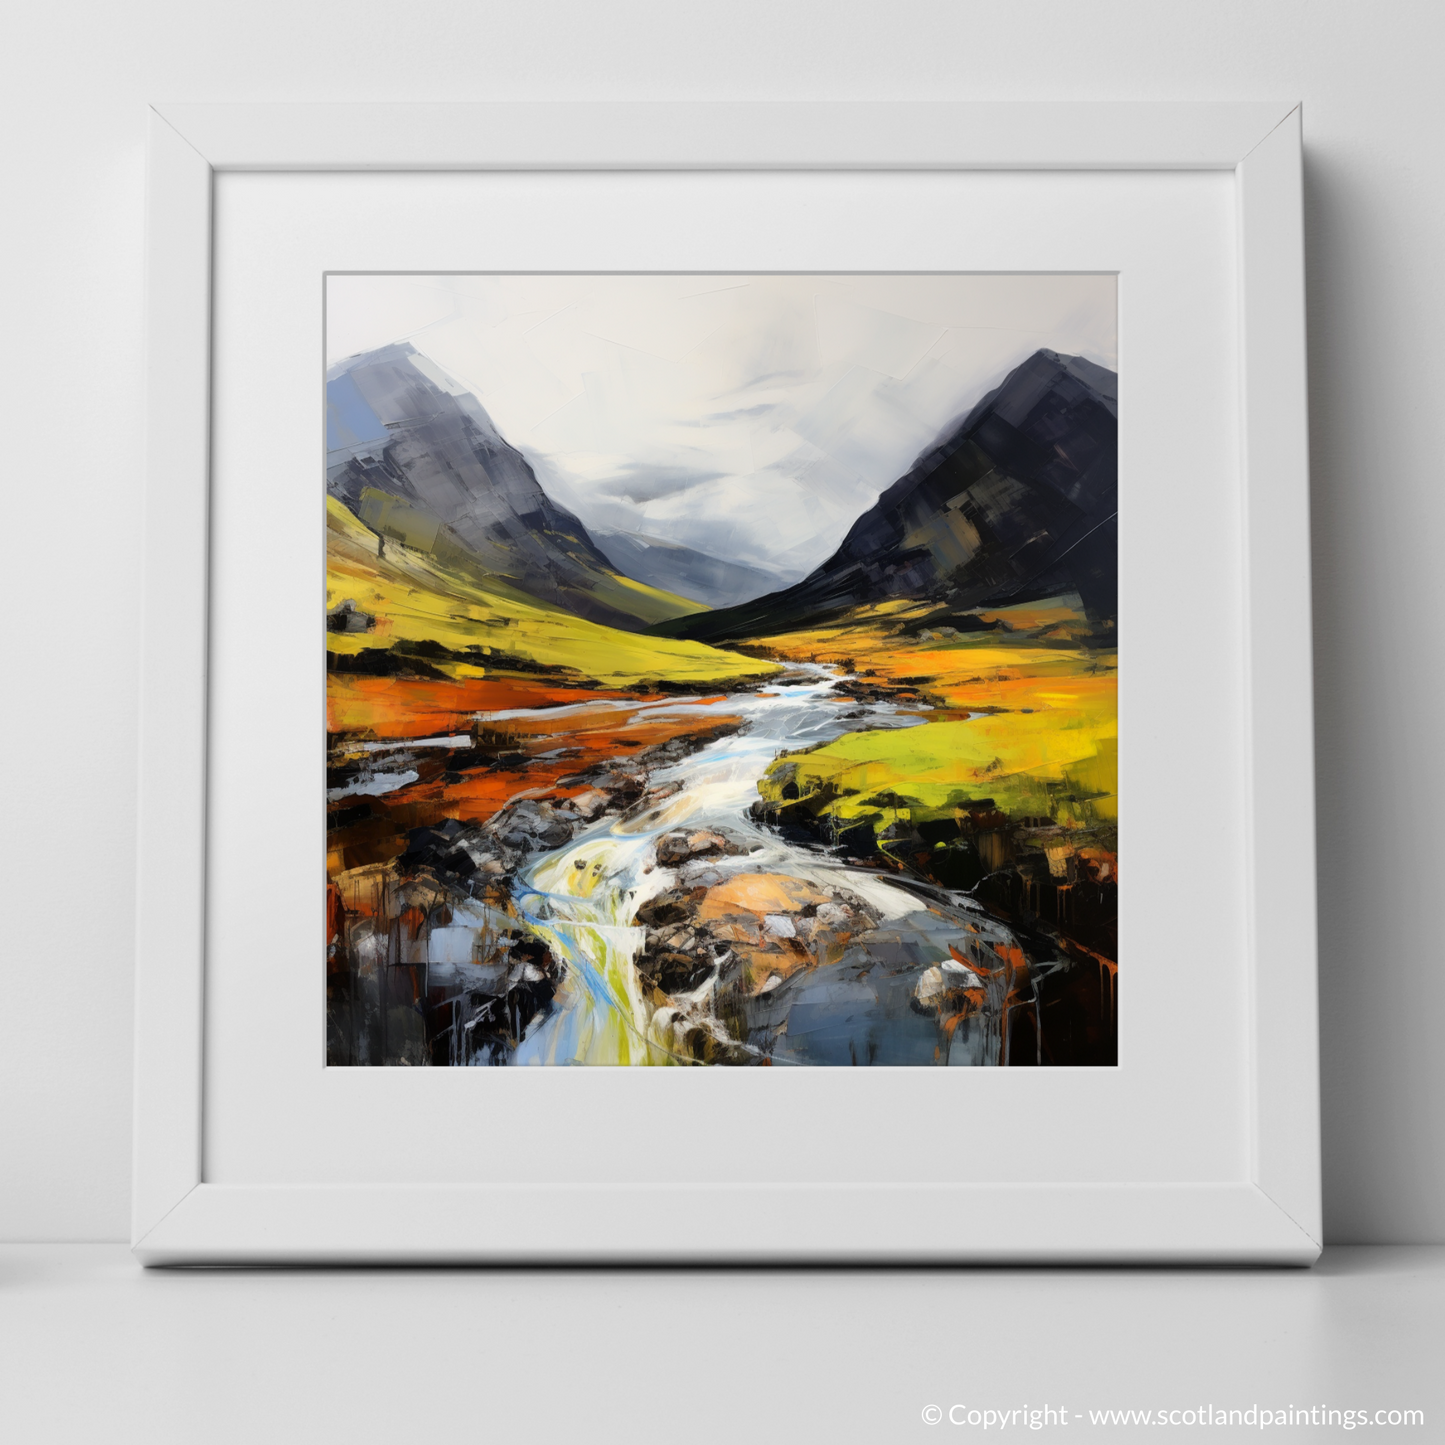 Art Print of Glen Coe, Highlands with a white frame